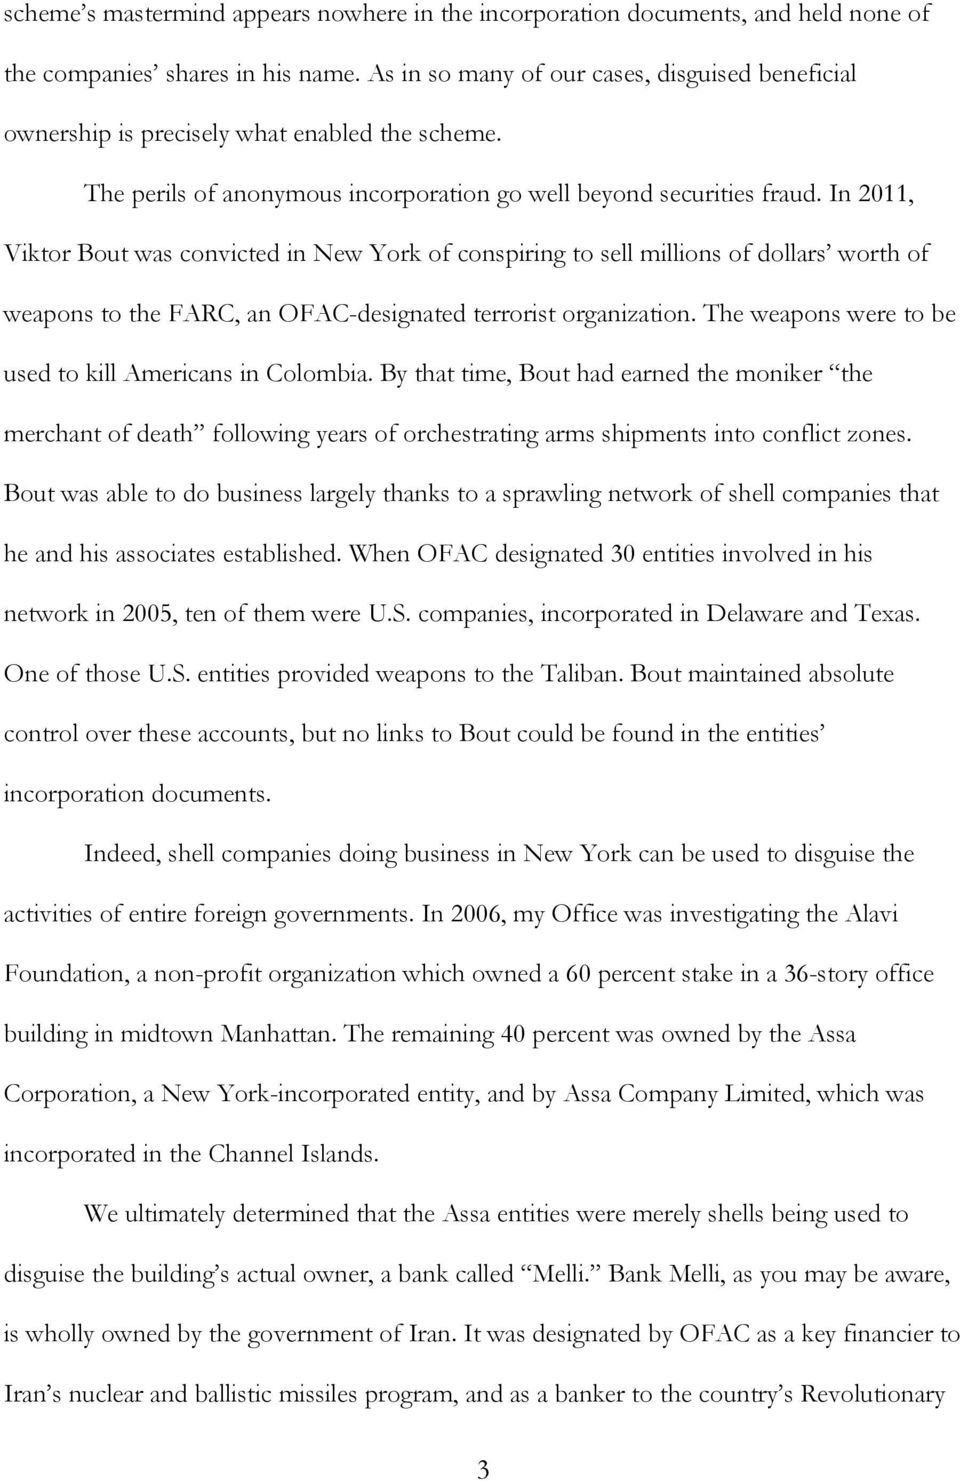 In 2011, Viktor Bout was convicted in New York of conspiring to sell millions of dollars worth of weapons to the FARC, an OFAC-designated terrorist organization.